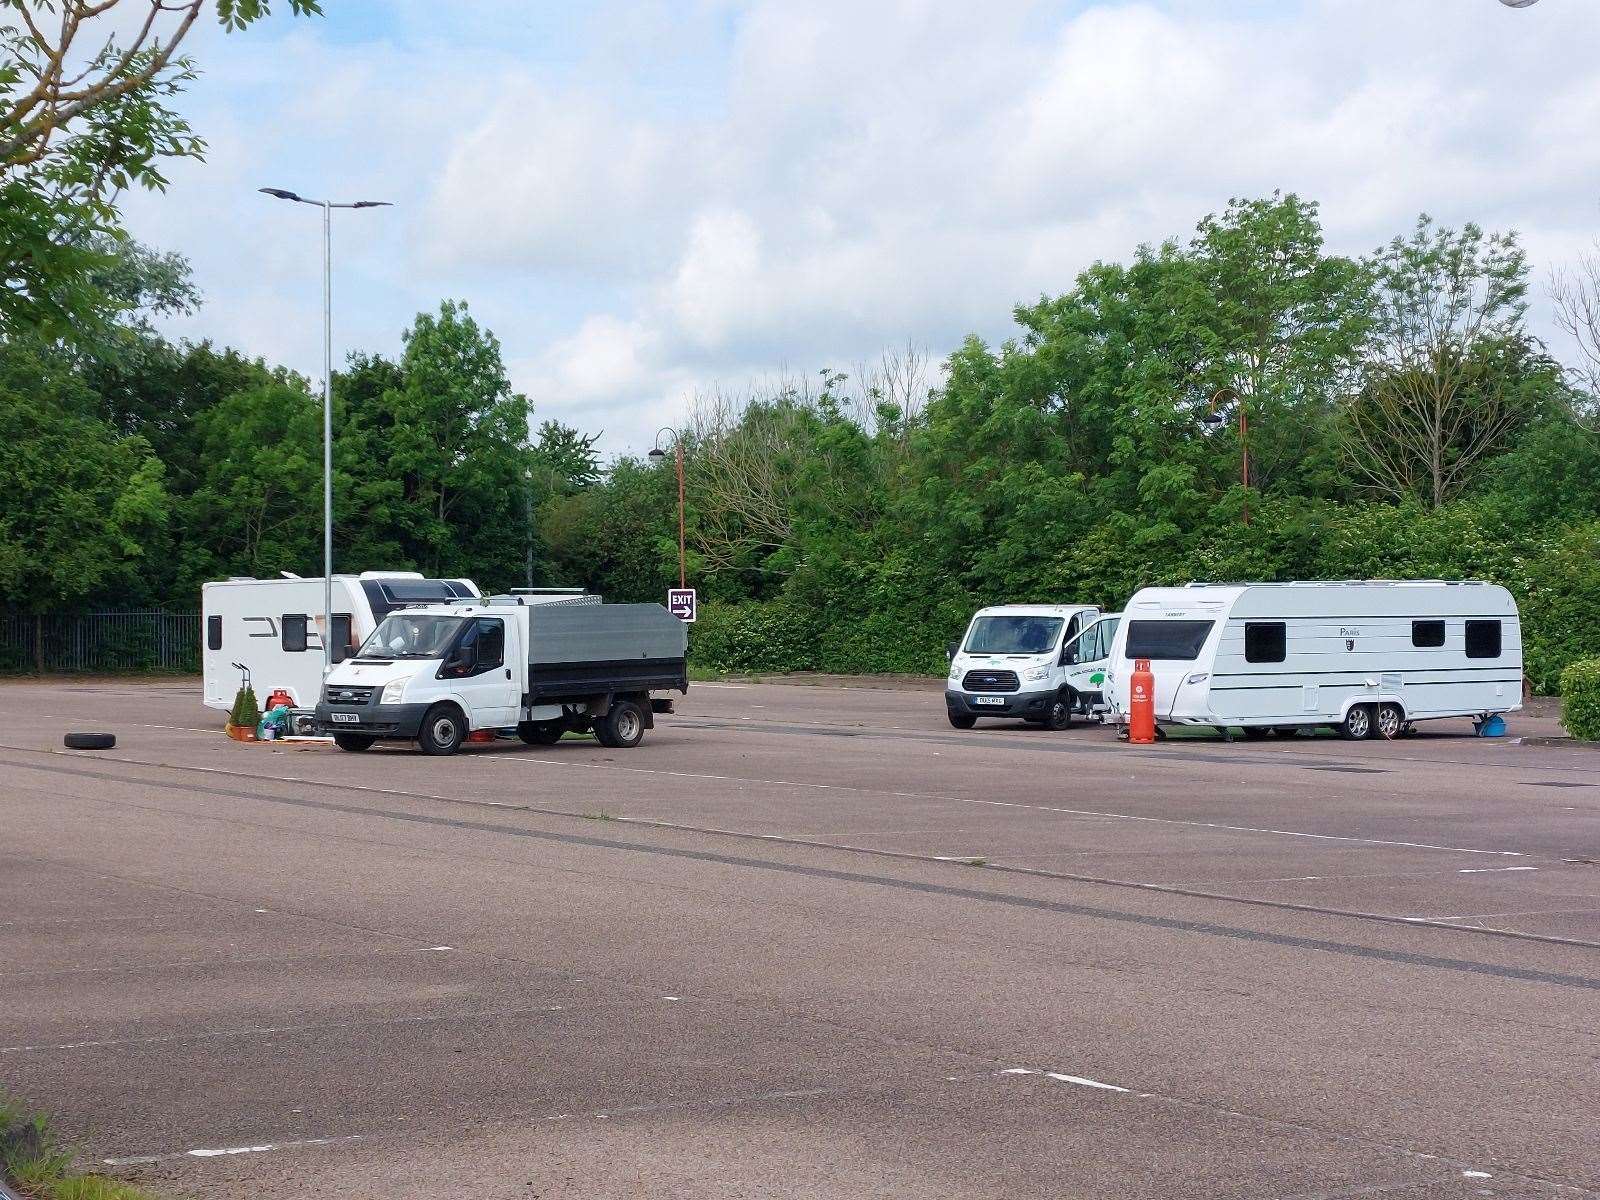 Two caravans and a couple of vans were spotted at Wincheap Park and Ride in Canterbury this morning